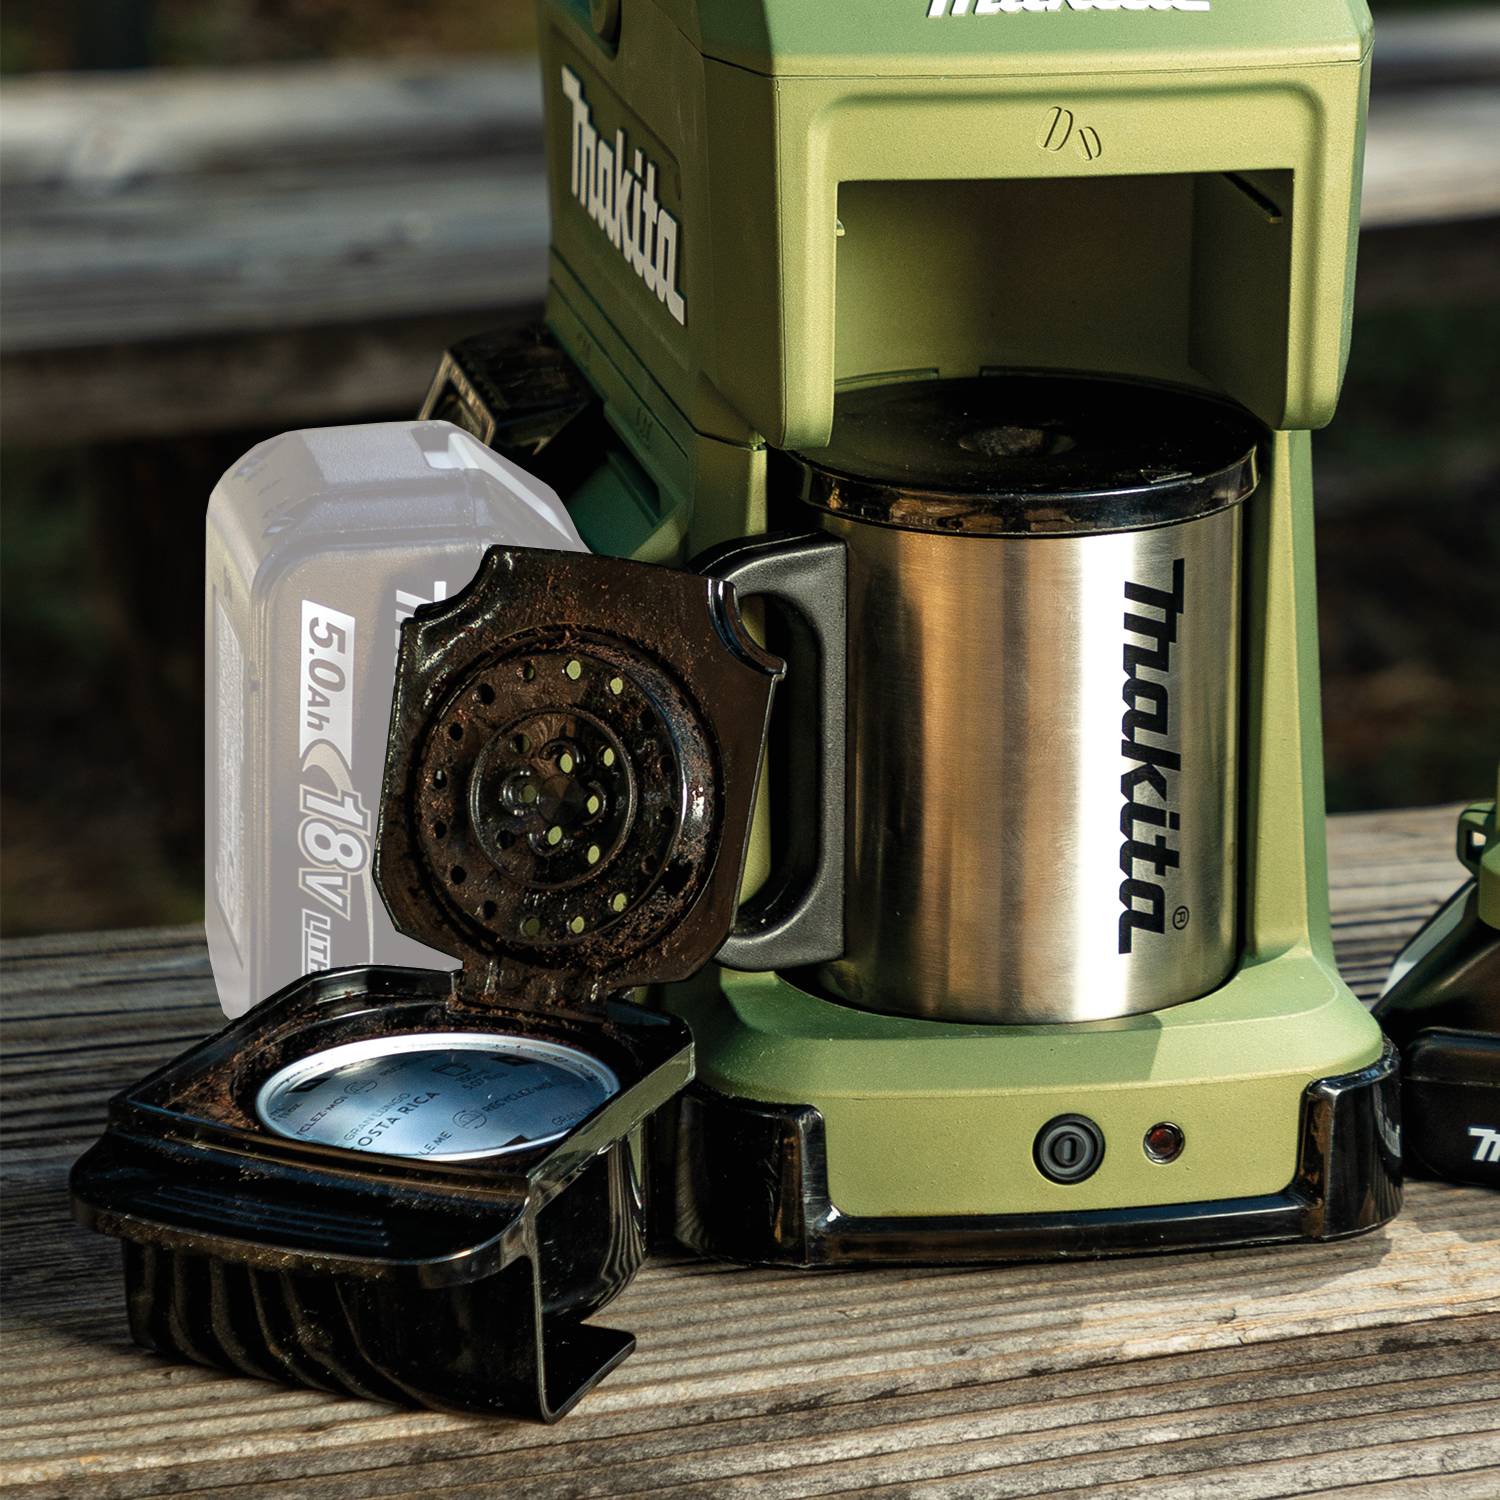 Makita Coffee Makers Review — Pretty Cool! 4.5 out of 5 Stars